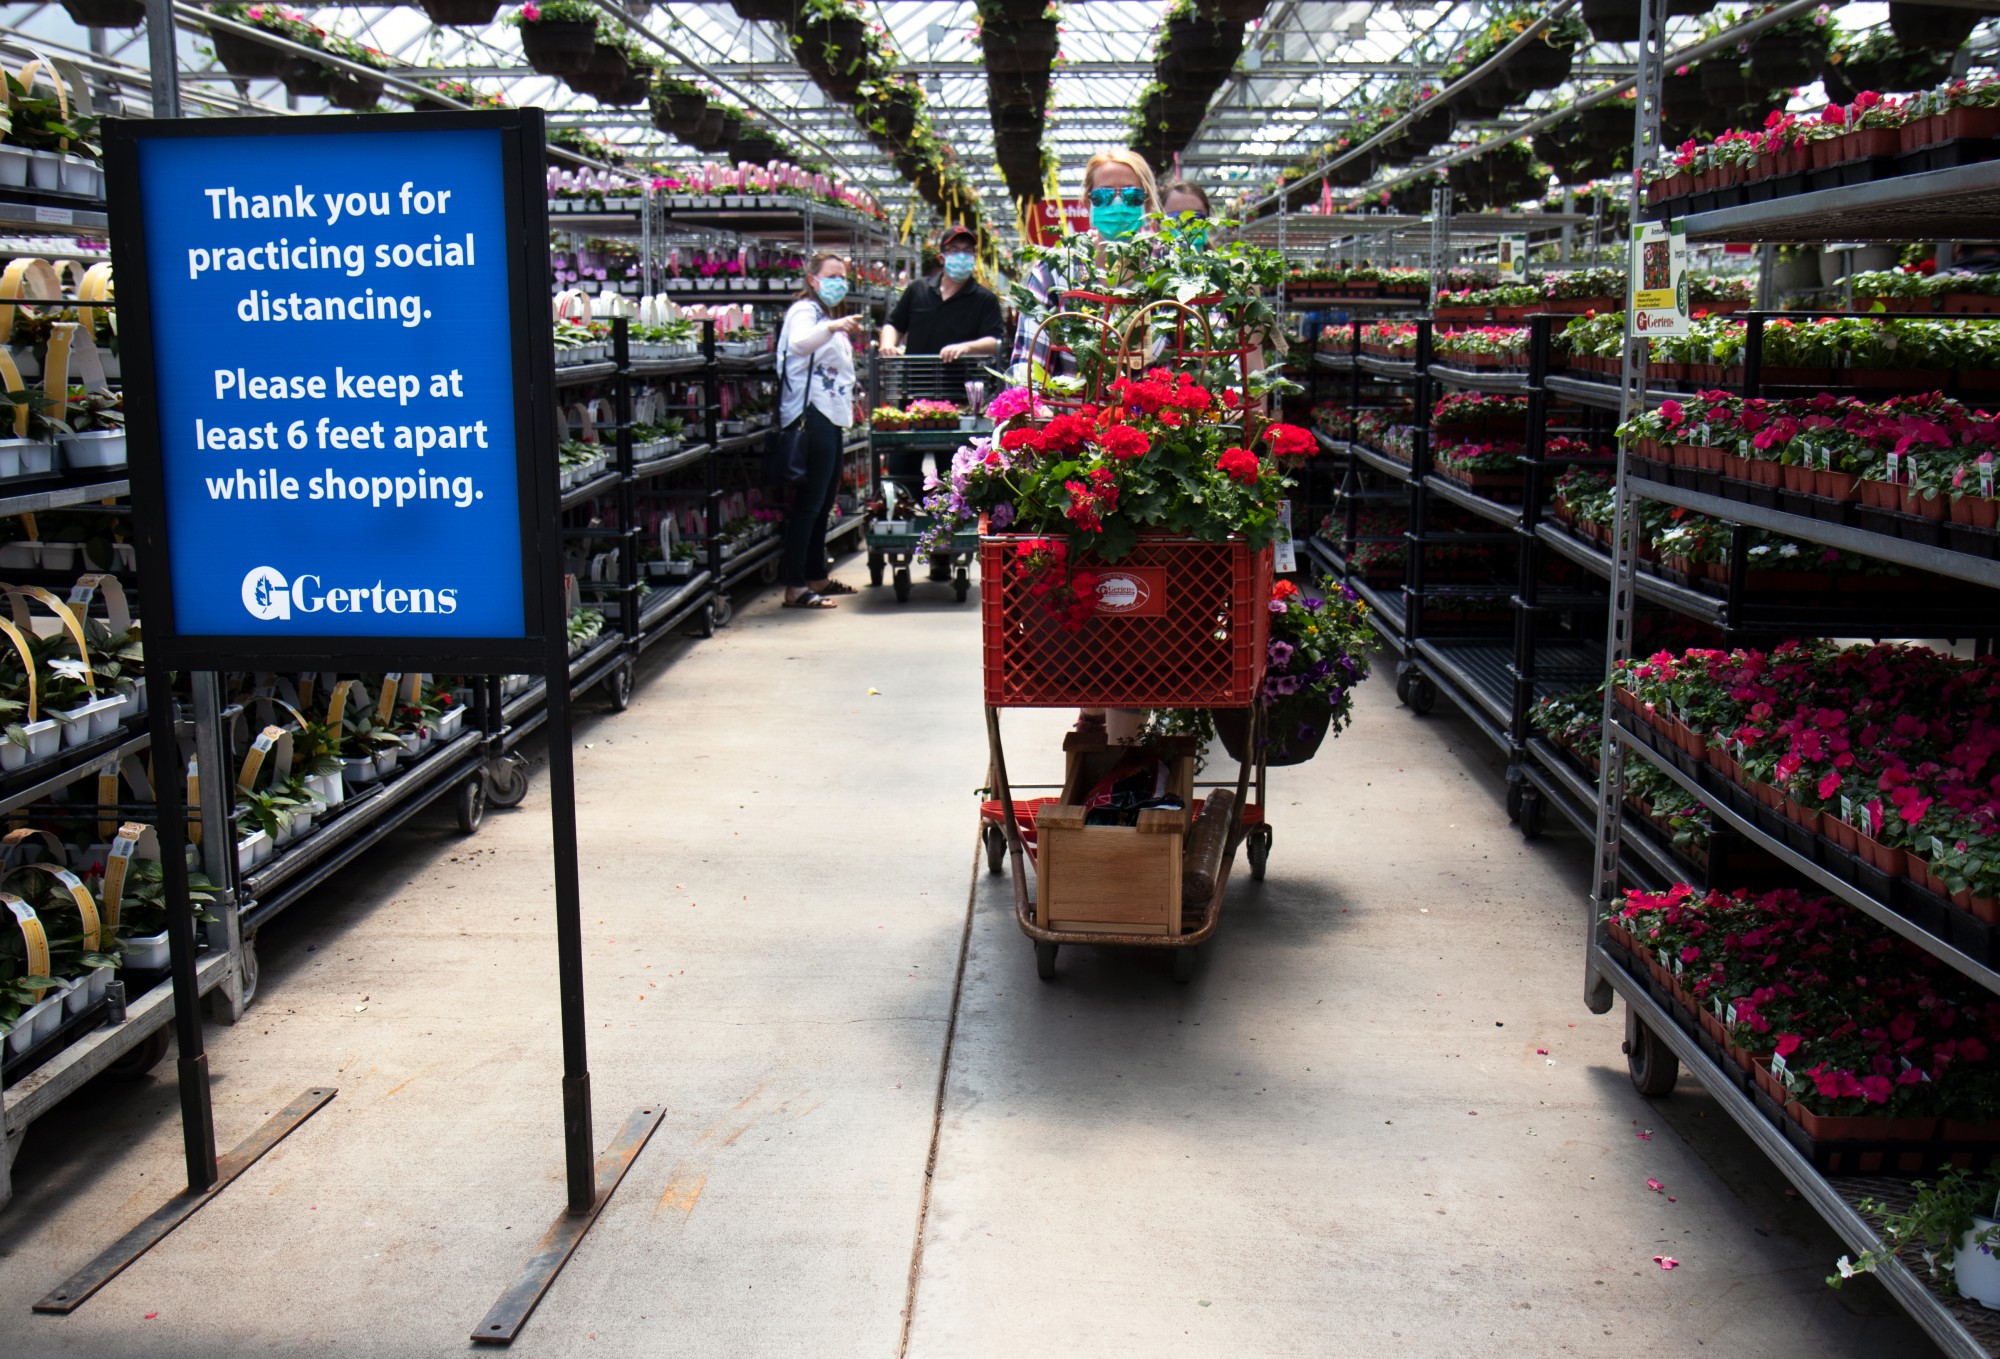 Customers wear face masks as they pick out plants at Gertens greenhouse and nursery in Inver Grove Heights on Sunday, May 3. Gertens more than doubled the number of checkouts this spring, including outdoor checkouts to help maintain social distancing for their customers and employees. 